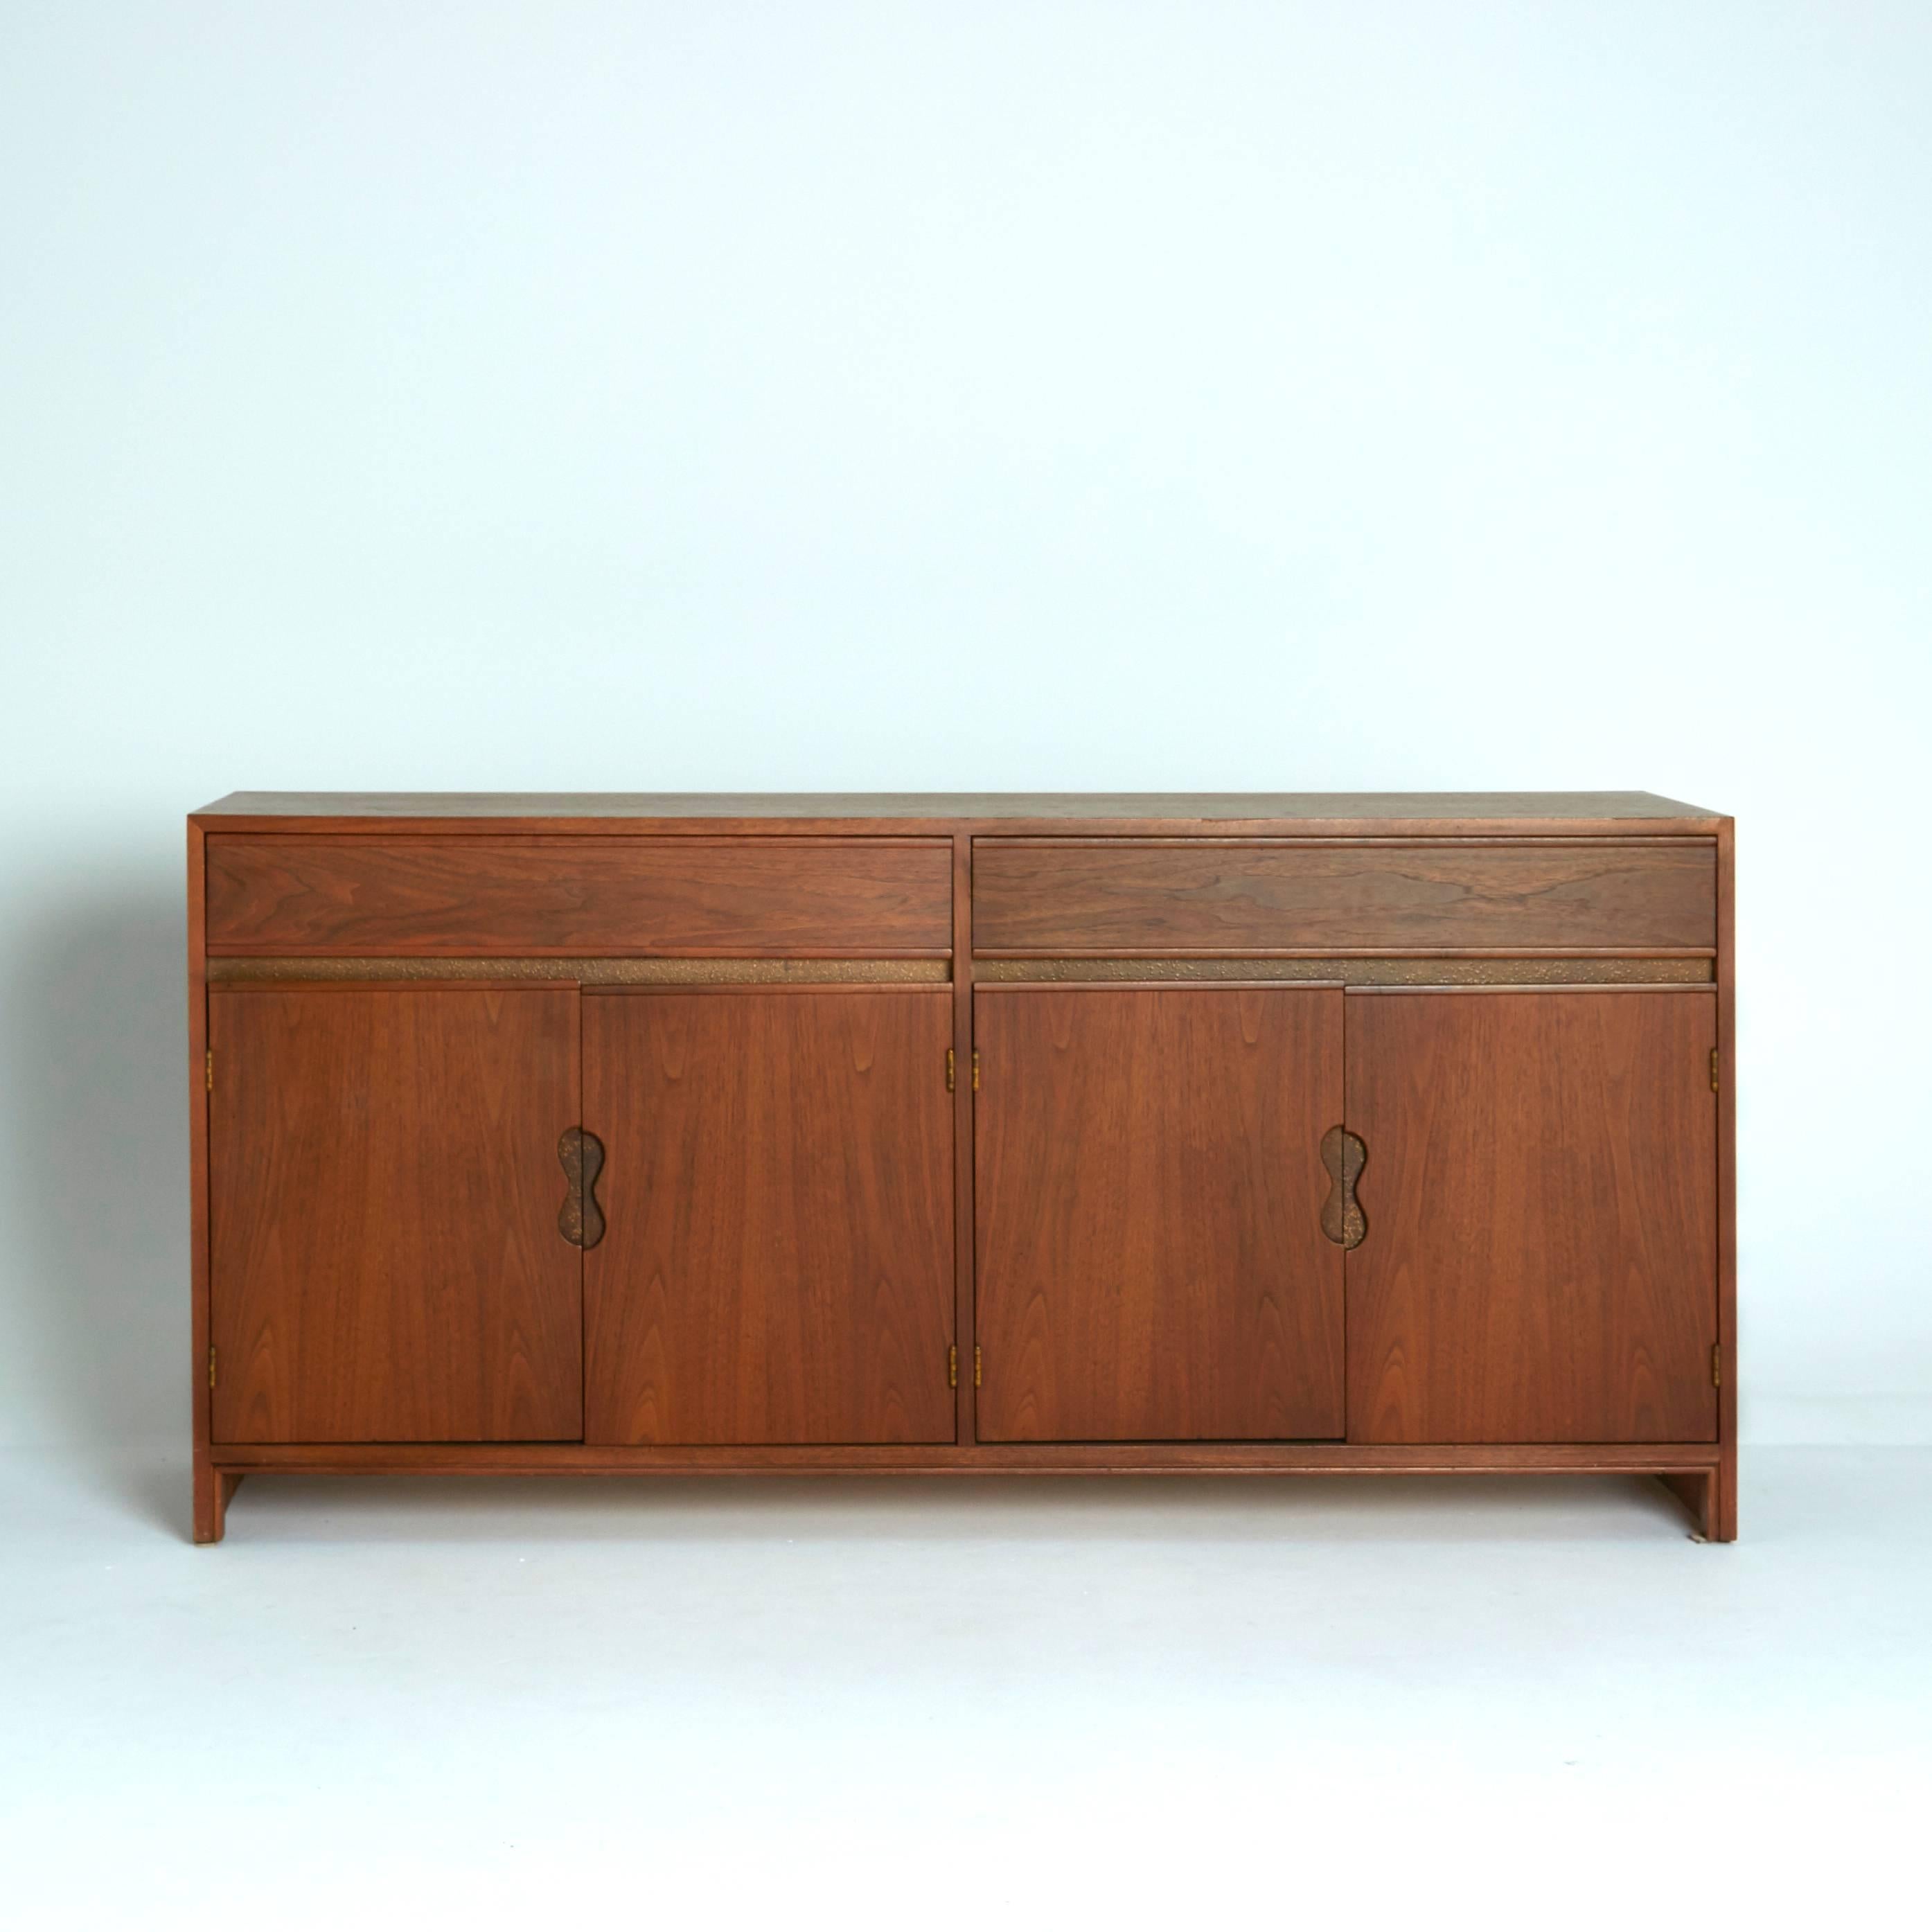 Designed in the 1950s by renowned Hungarian designer Paul Laszlo and manufactured by Brown Saltman, this credenza is a very rare and special piece. The rich grain of the walnut and the biomorphic shape of the door handles make this piece stand out